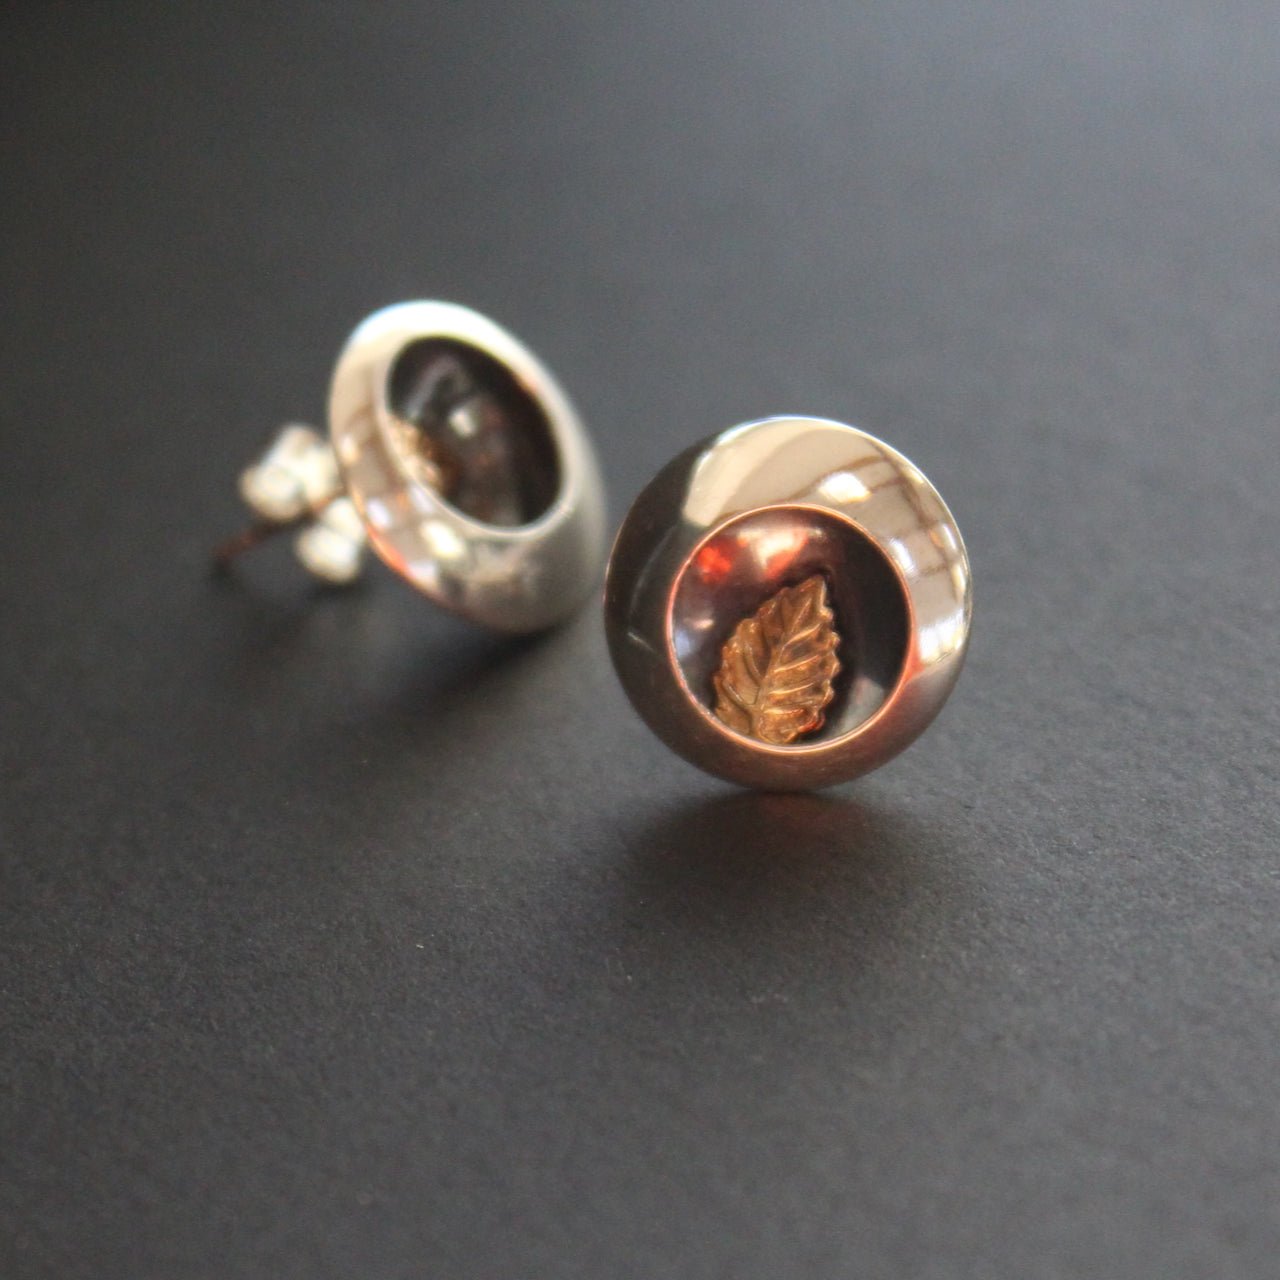 Round silver stud earrings with leaf inlay by artist Beverly Bartlett.